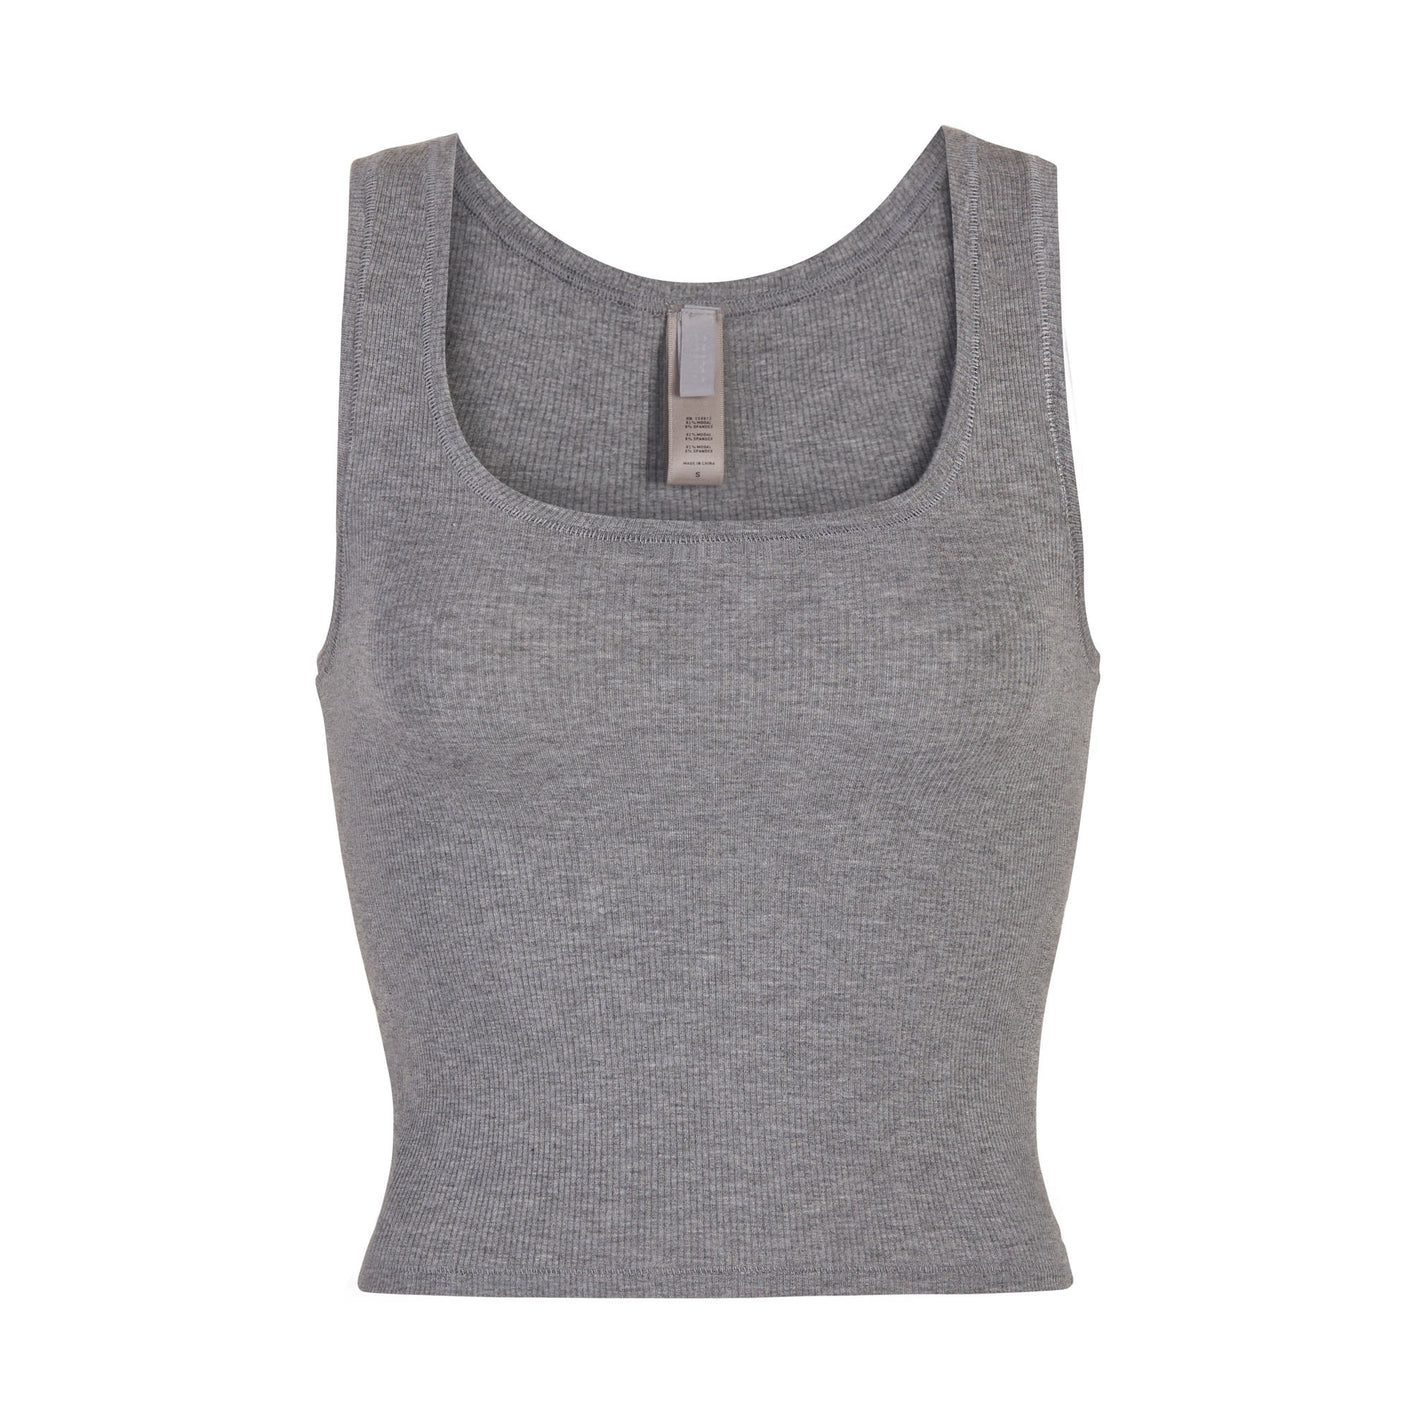 SKIMS - Ultra soft and comfortable, the SKIMS BODY Tank is perfect